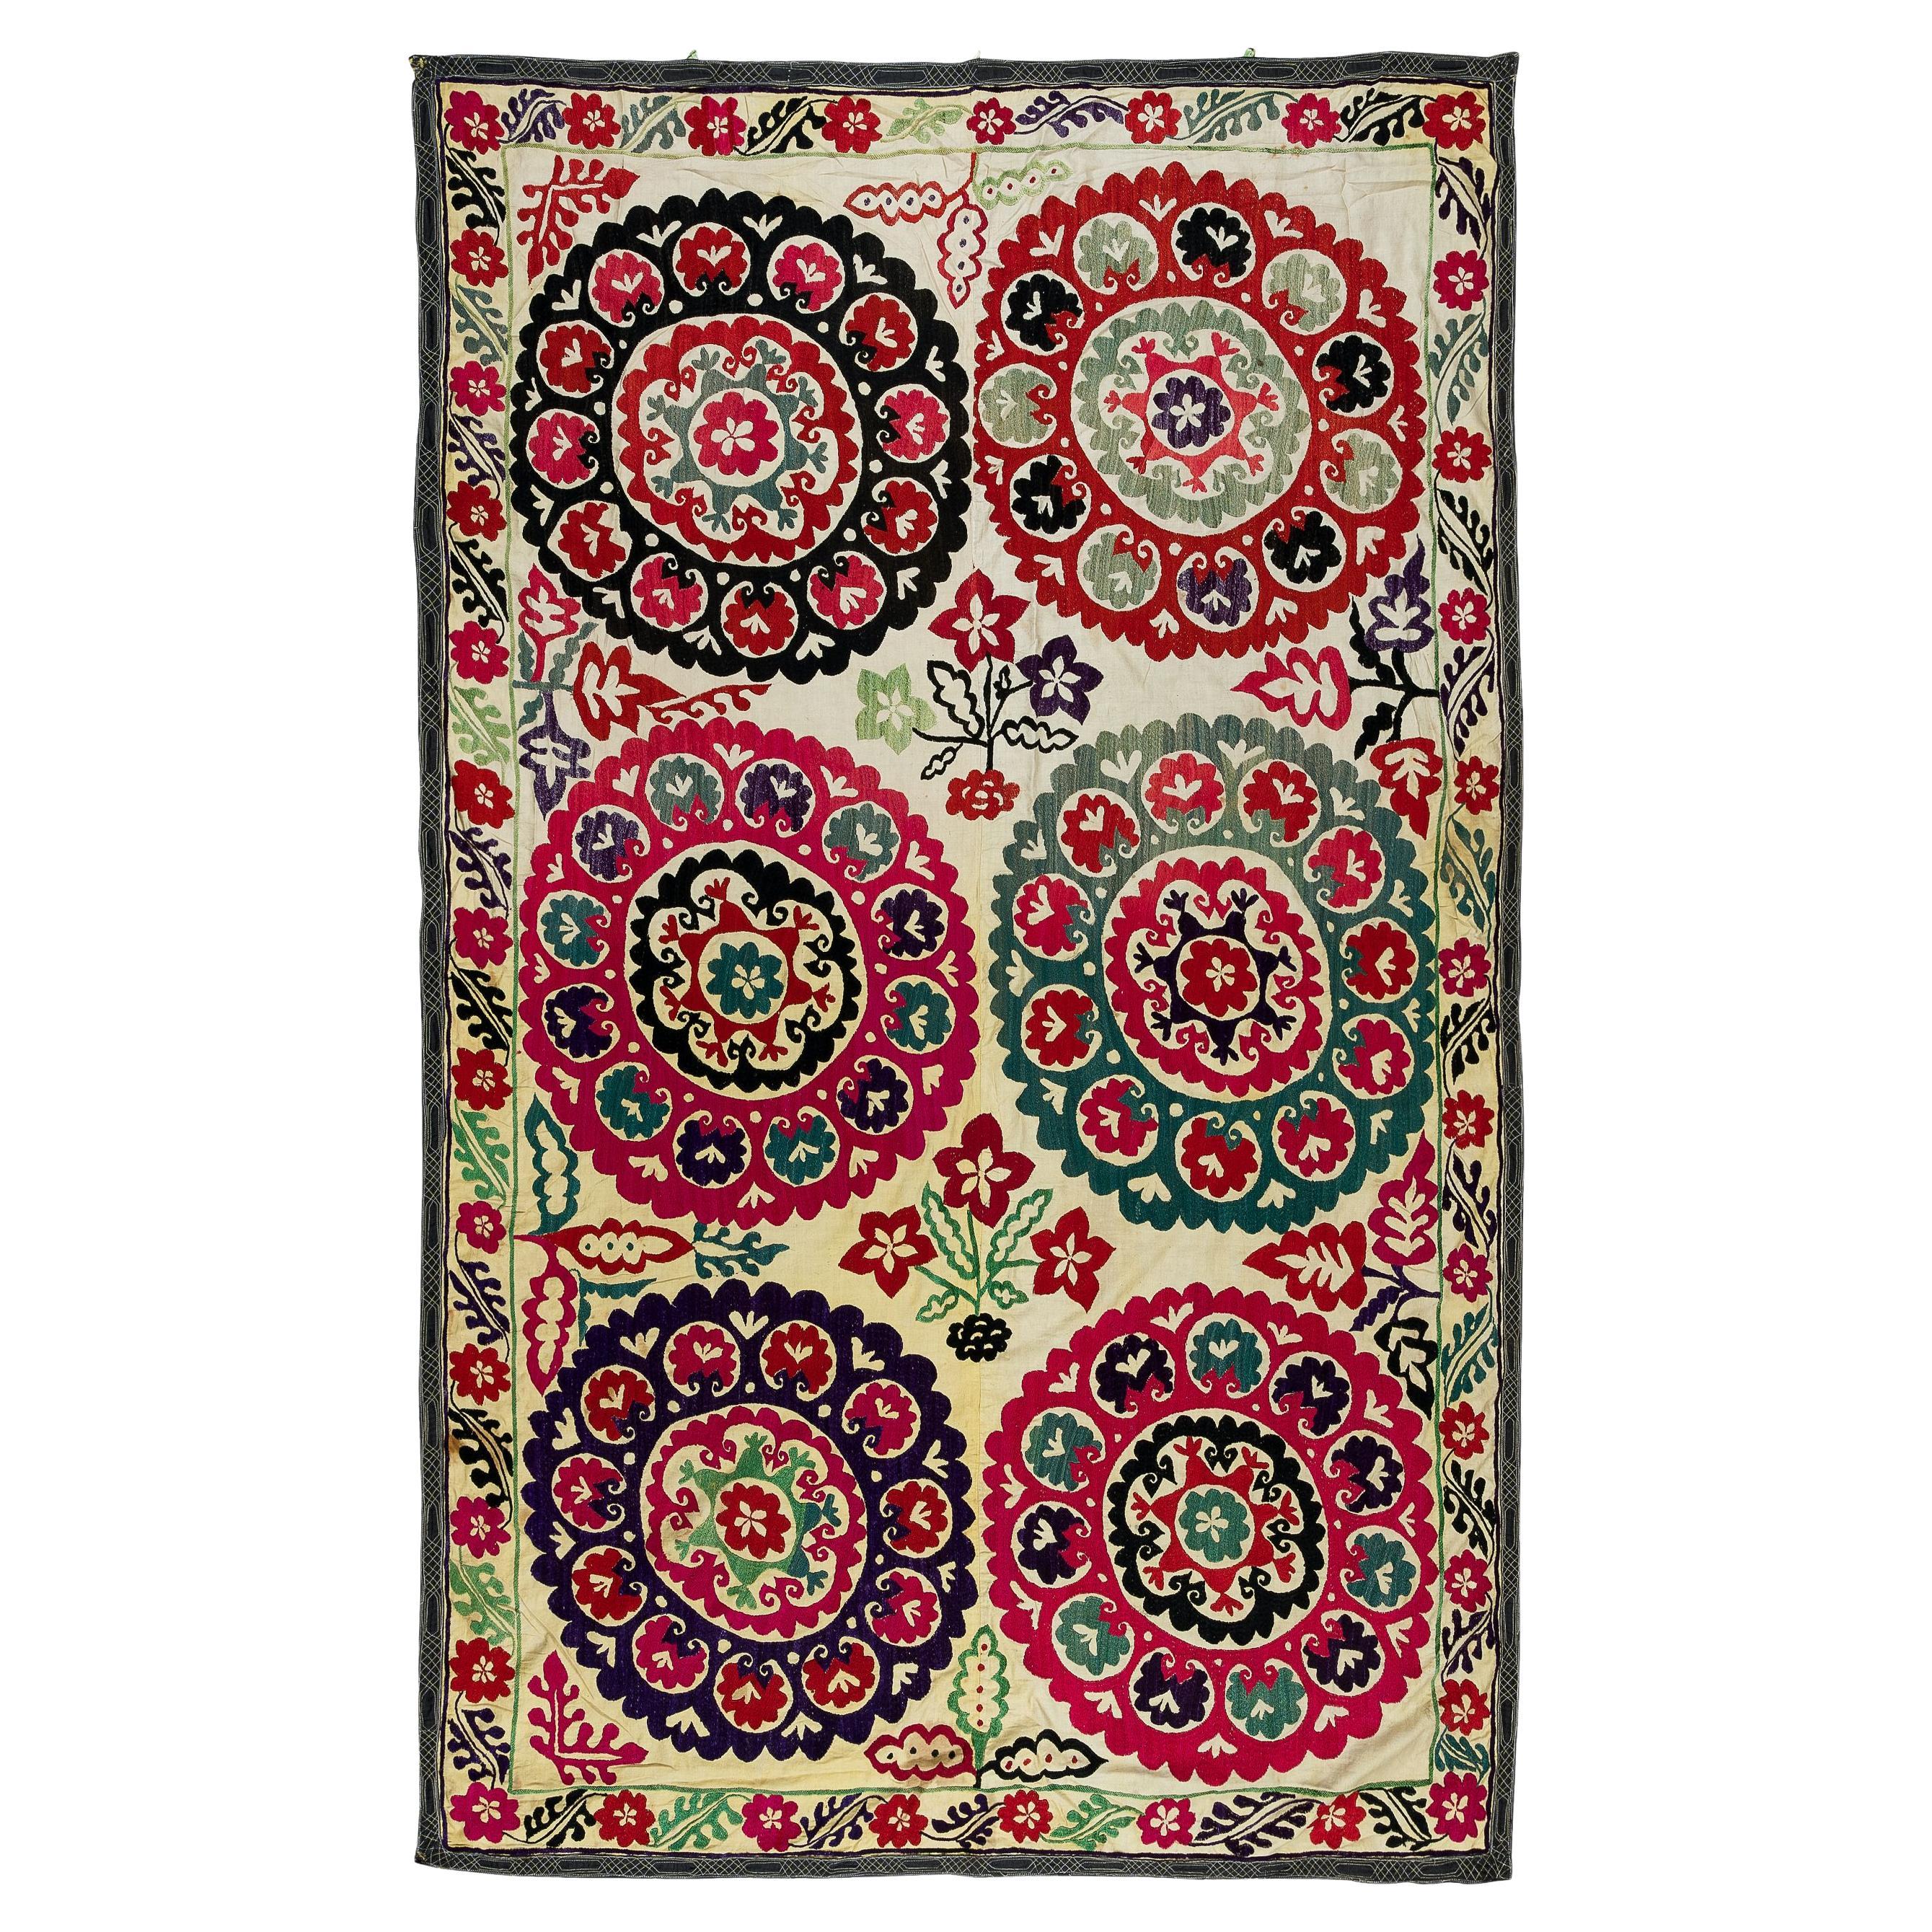 4.7x7.4 Ft Silk Embroidery Wall Hanging, Suzani Tablecloth, Vintage Bedspread